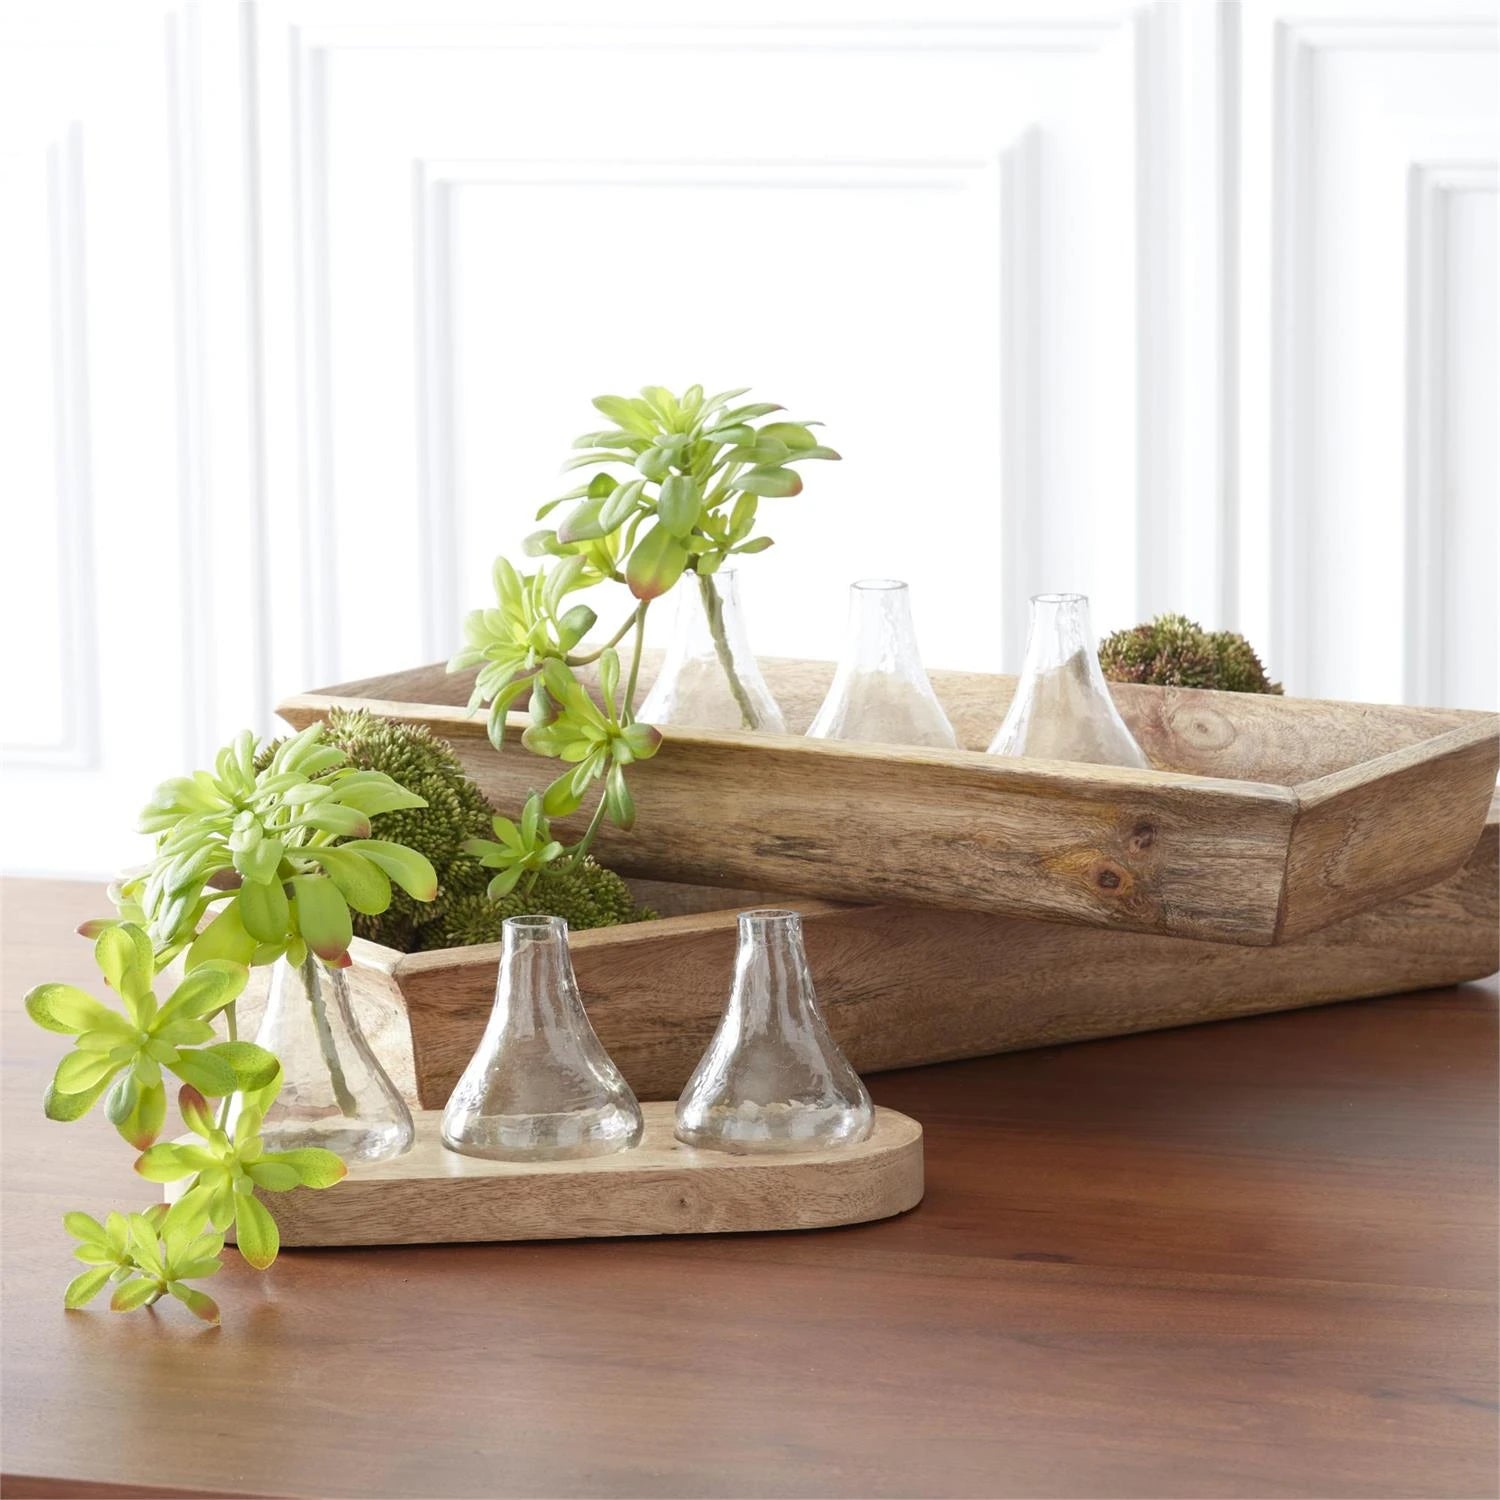 Green sedum balls displayed in natural wood dough bowls on a kitchen table. 